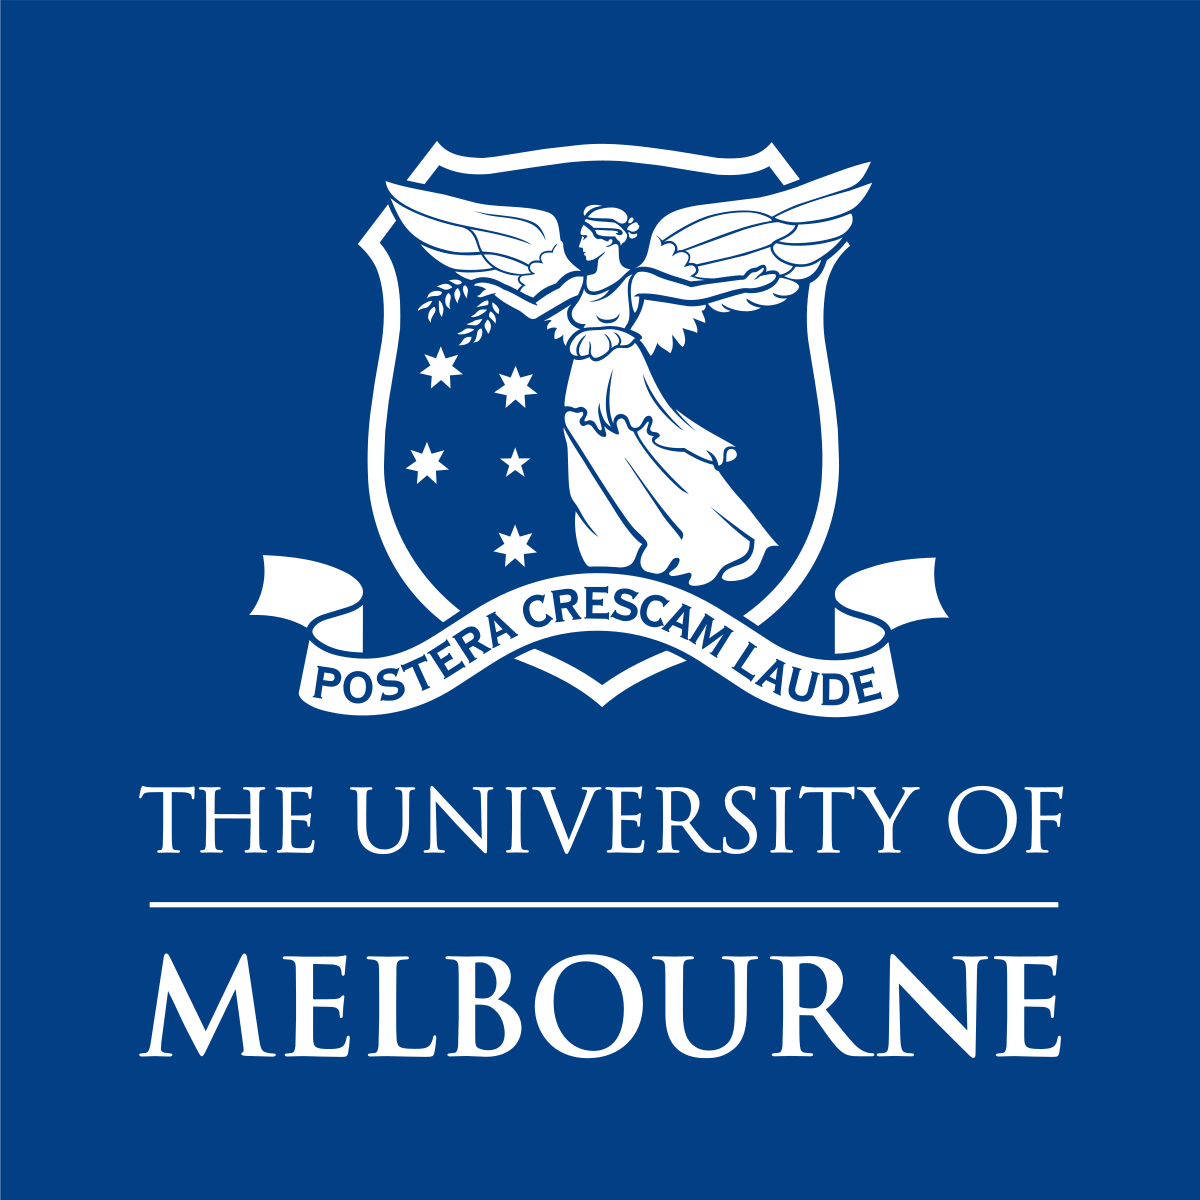 University of Melbourne Graduate Research Scholarships